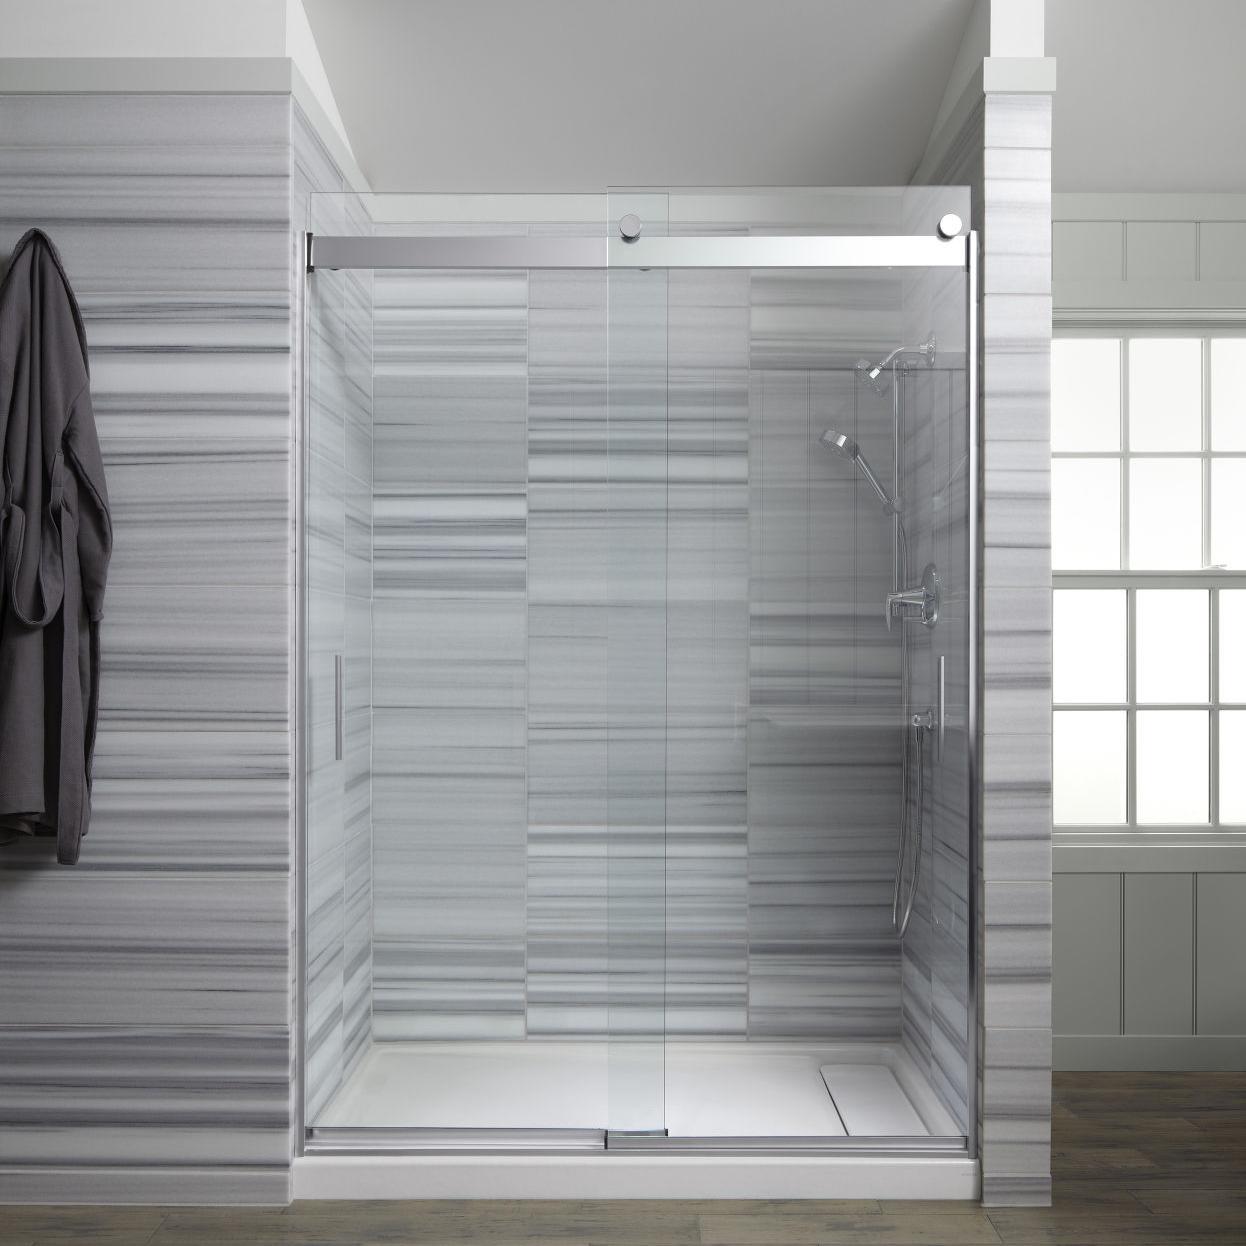 A cast-iron shower base can be a strong choice | Siouxland Homes | siouxcityjournal.com